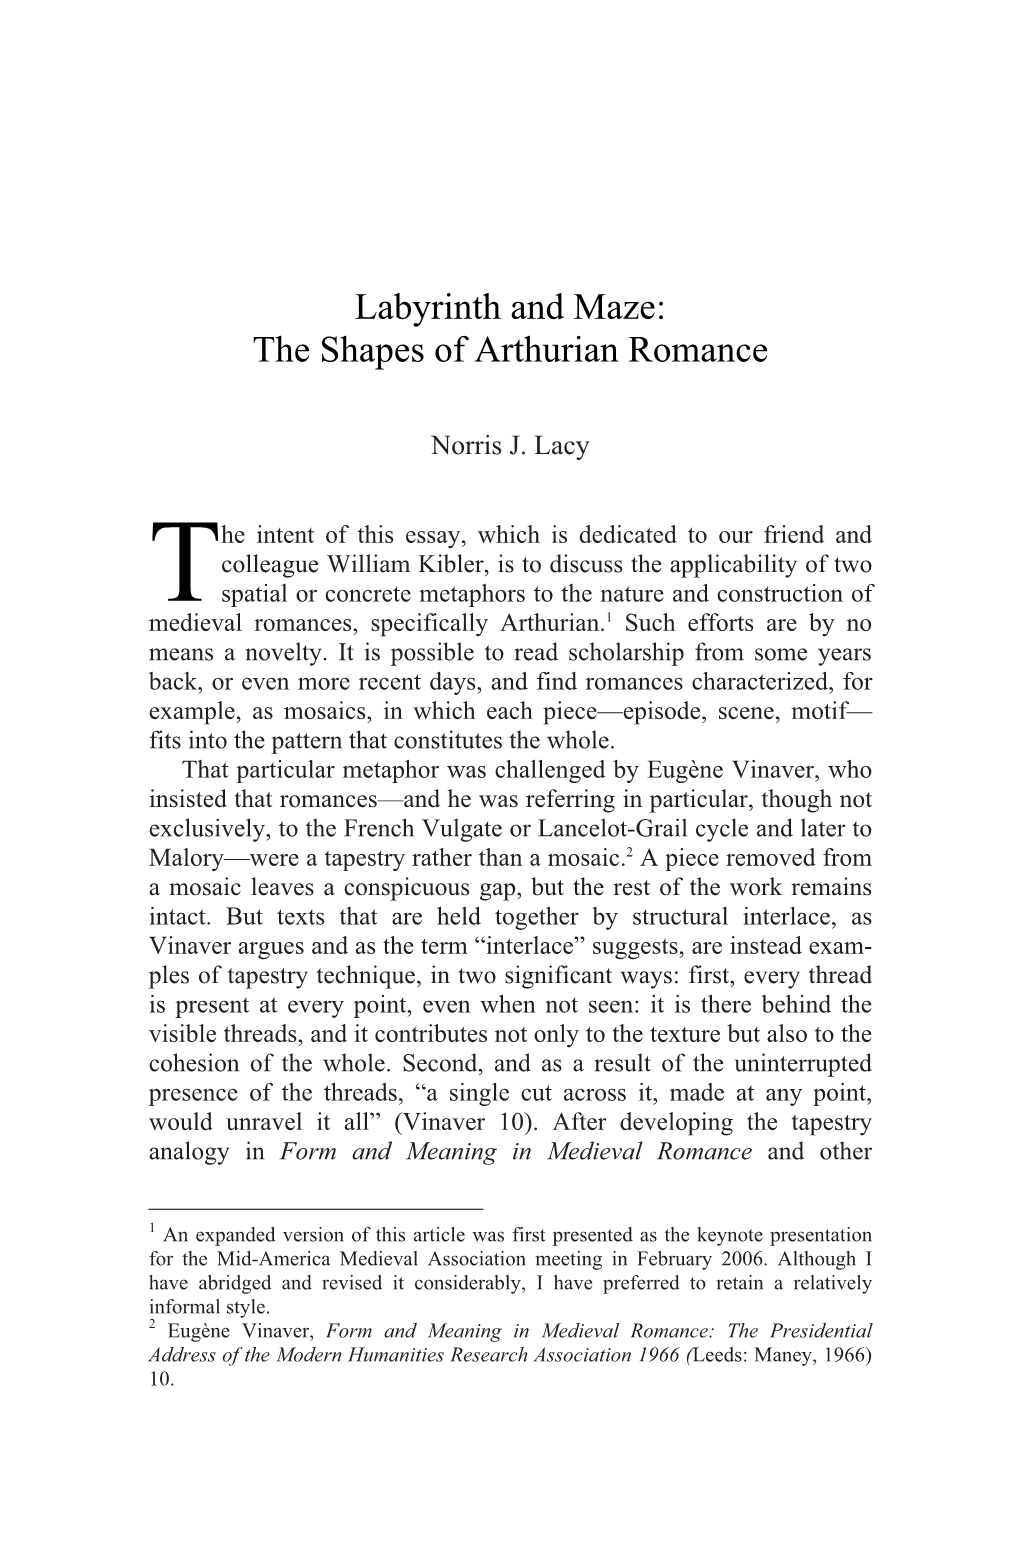 Labyrinth and Maze: the Shapes of Arthurian Romance